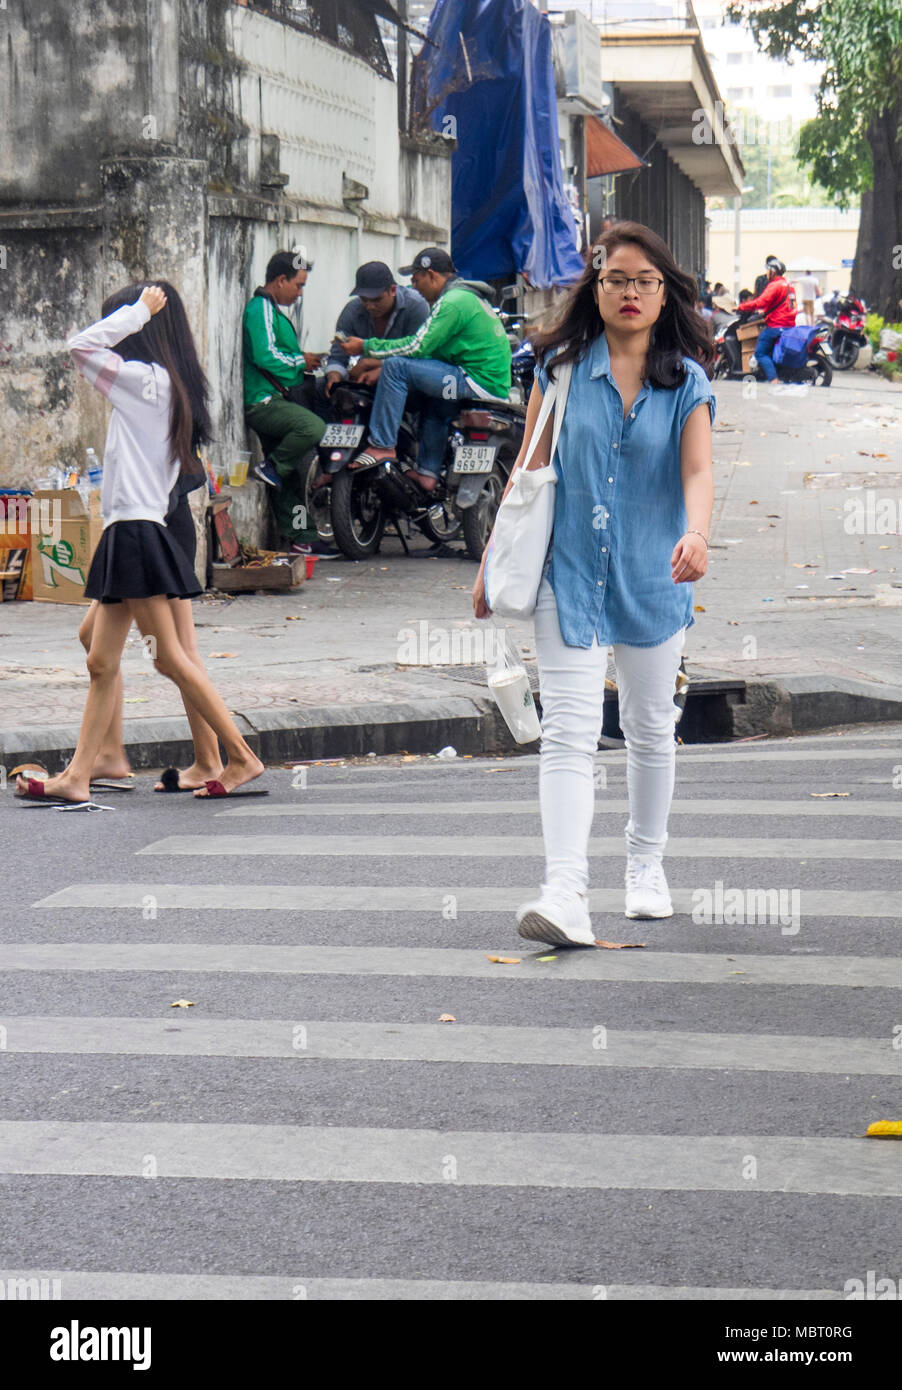 How To Cross The Road Safely In Vietnam